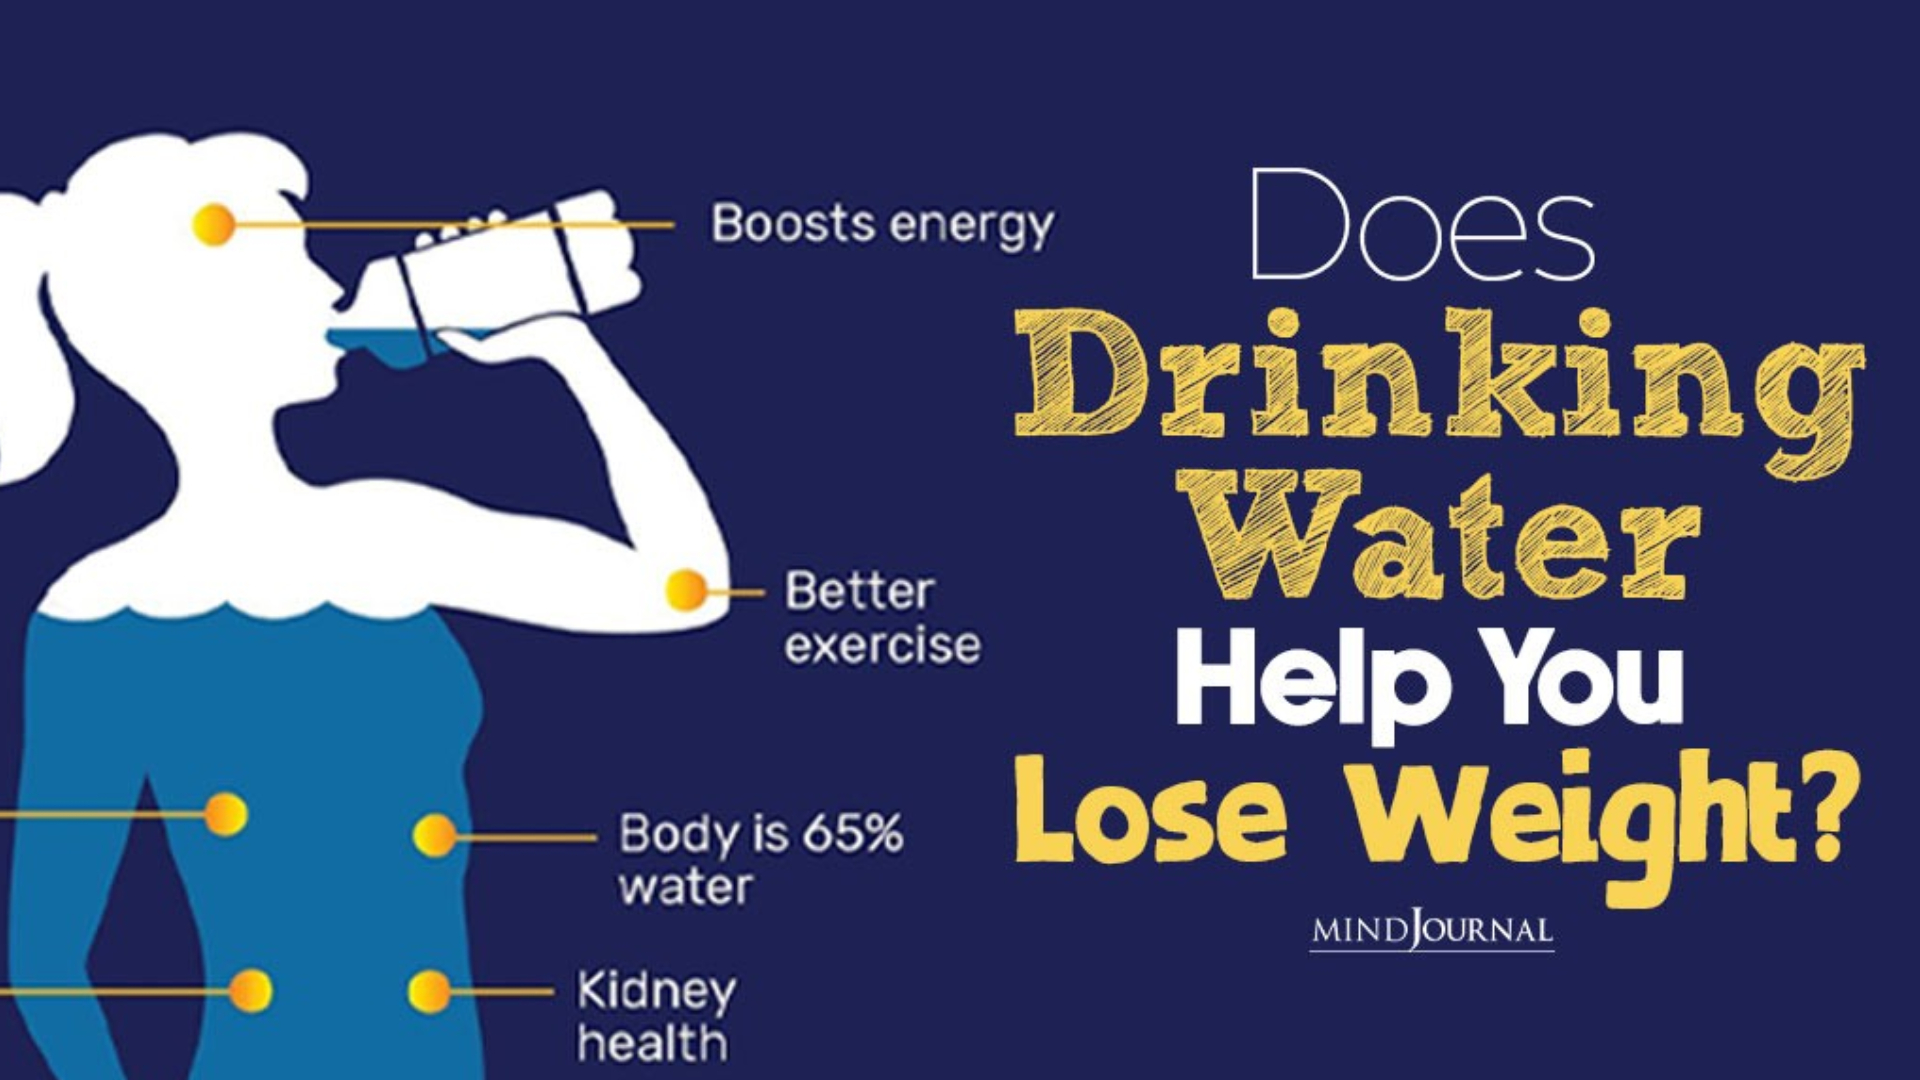 Does Drinking Water Help You Lose Weight?